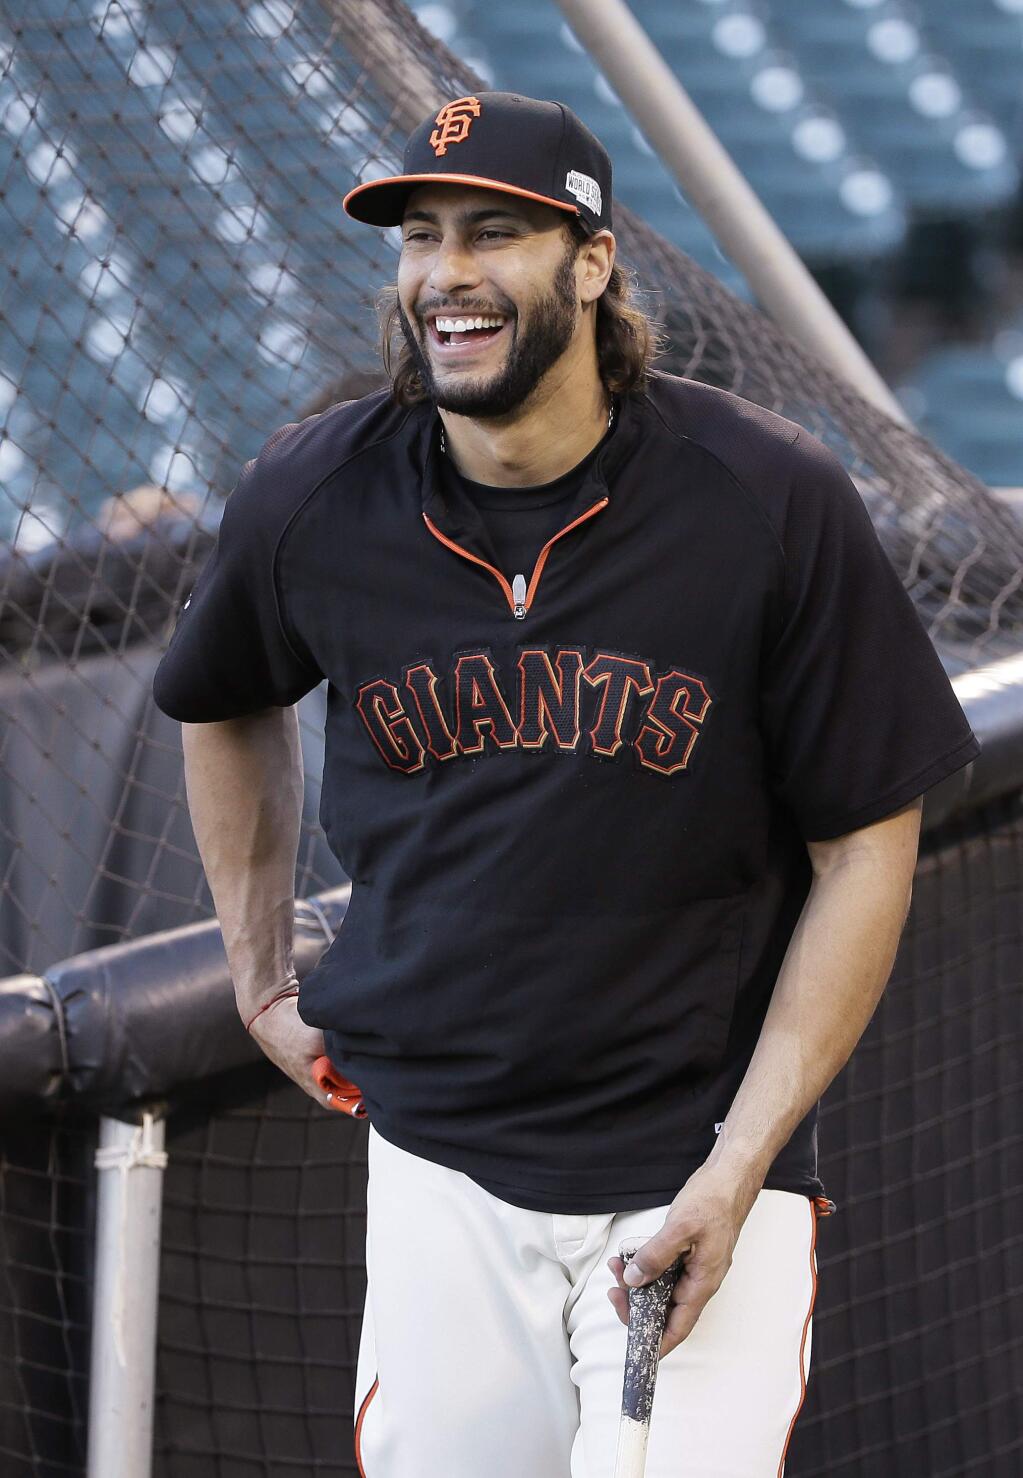 San Francisco Giants' Michael Morse laughs while standing behind the batting cage during the Giants' workout Thursday, Oct. 23, 2014, in San Francisco. The Giants are scheduled to face the Kansas City Royals in the third game of the baseball World Series on Friday. (AP Photo/Eric Risberg)